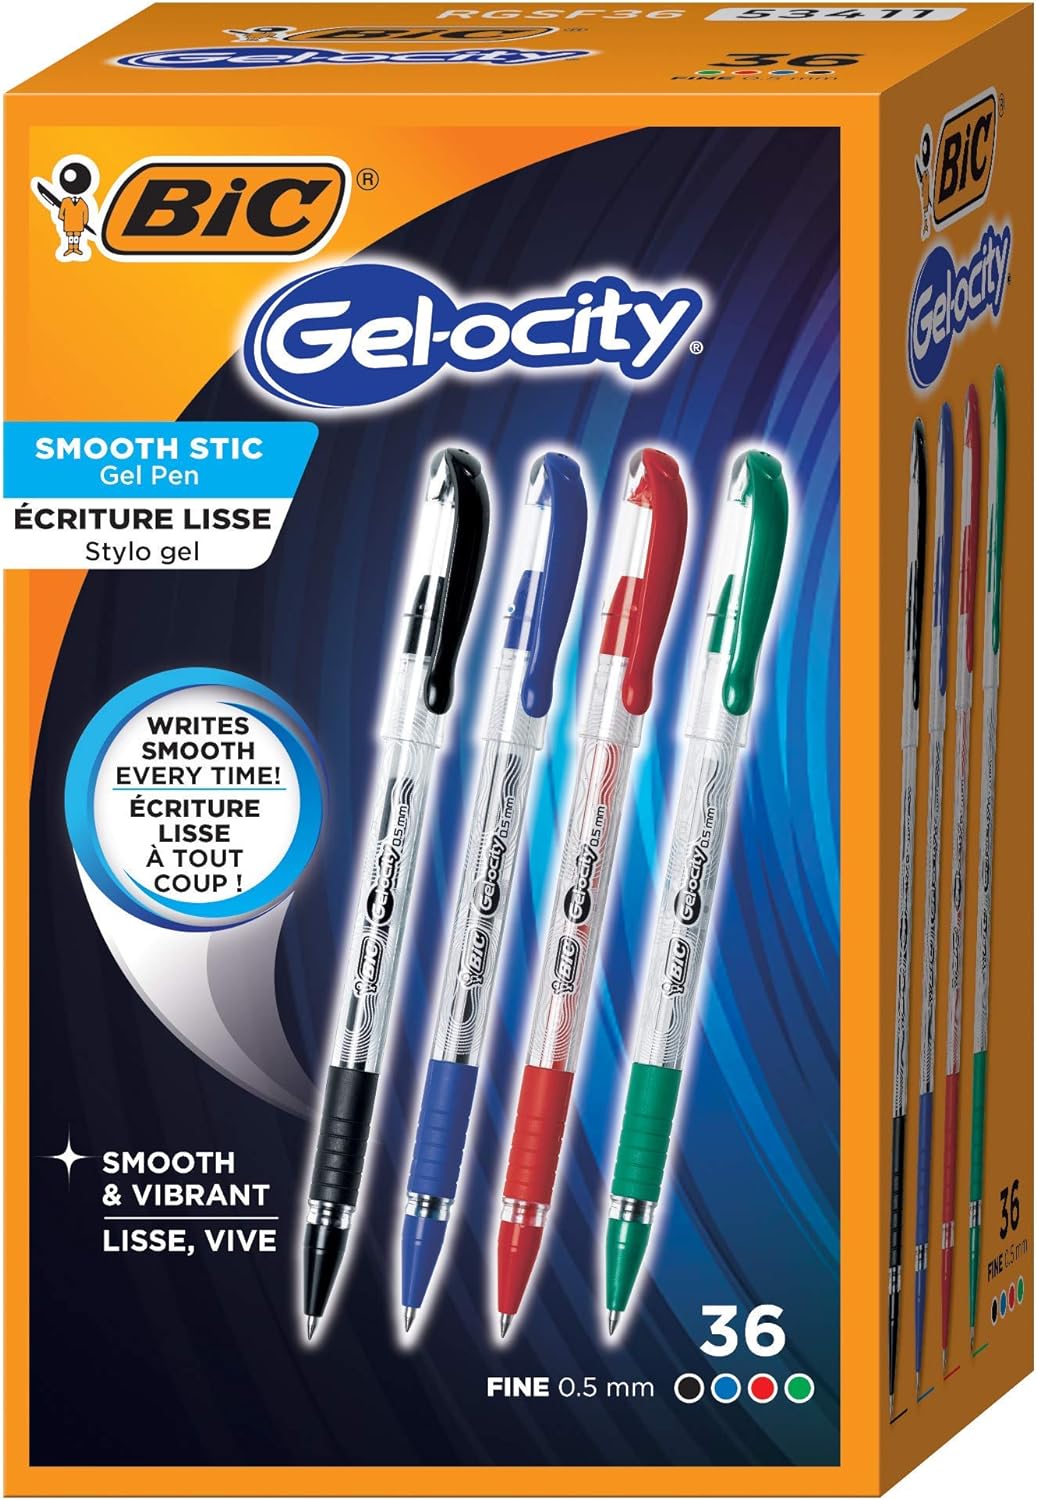 BIC Gel-ocity Smooth Stic Gel Pen, Fine Point (0.5mm), Assorted Colors, 36-Count, Vibrant and Smooth Gel Ink (Pack of 1)